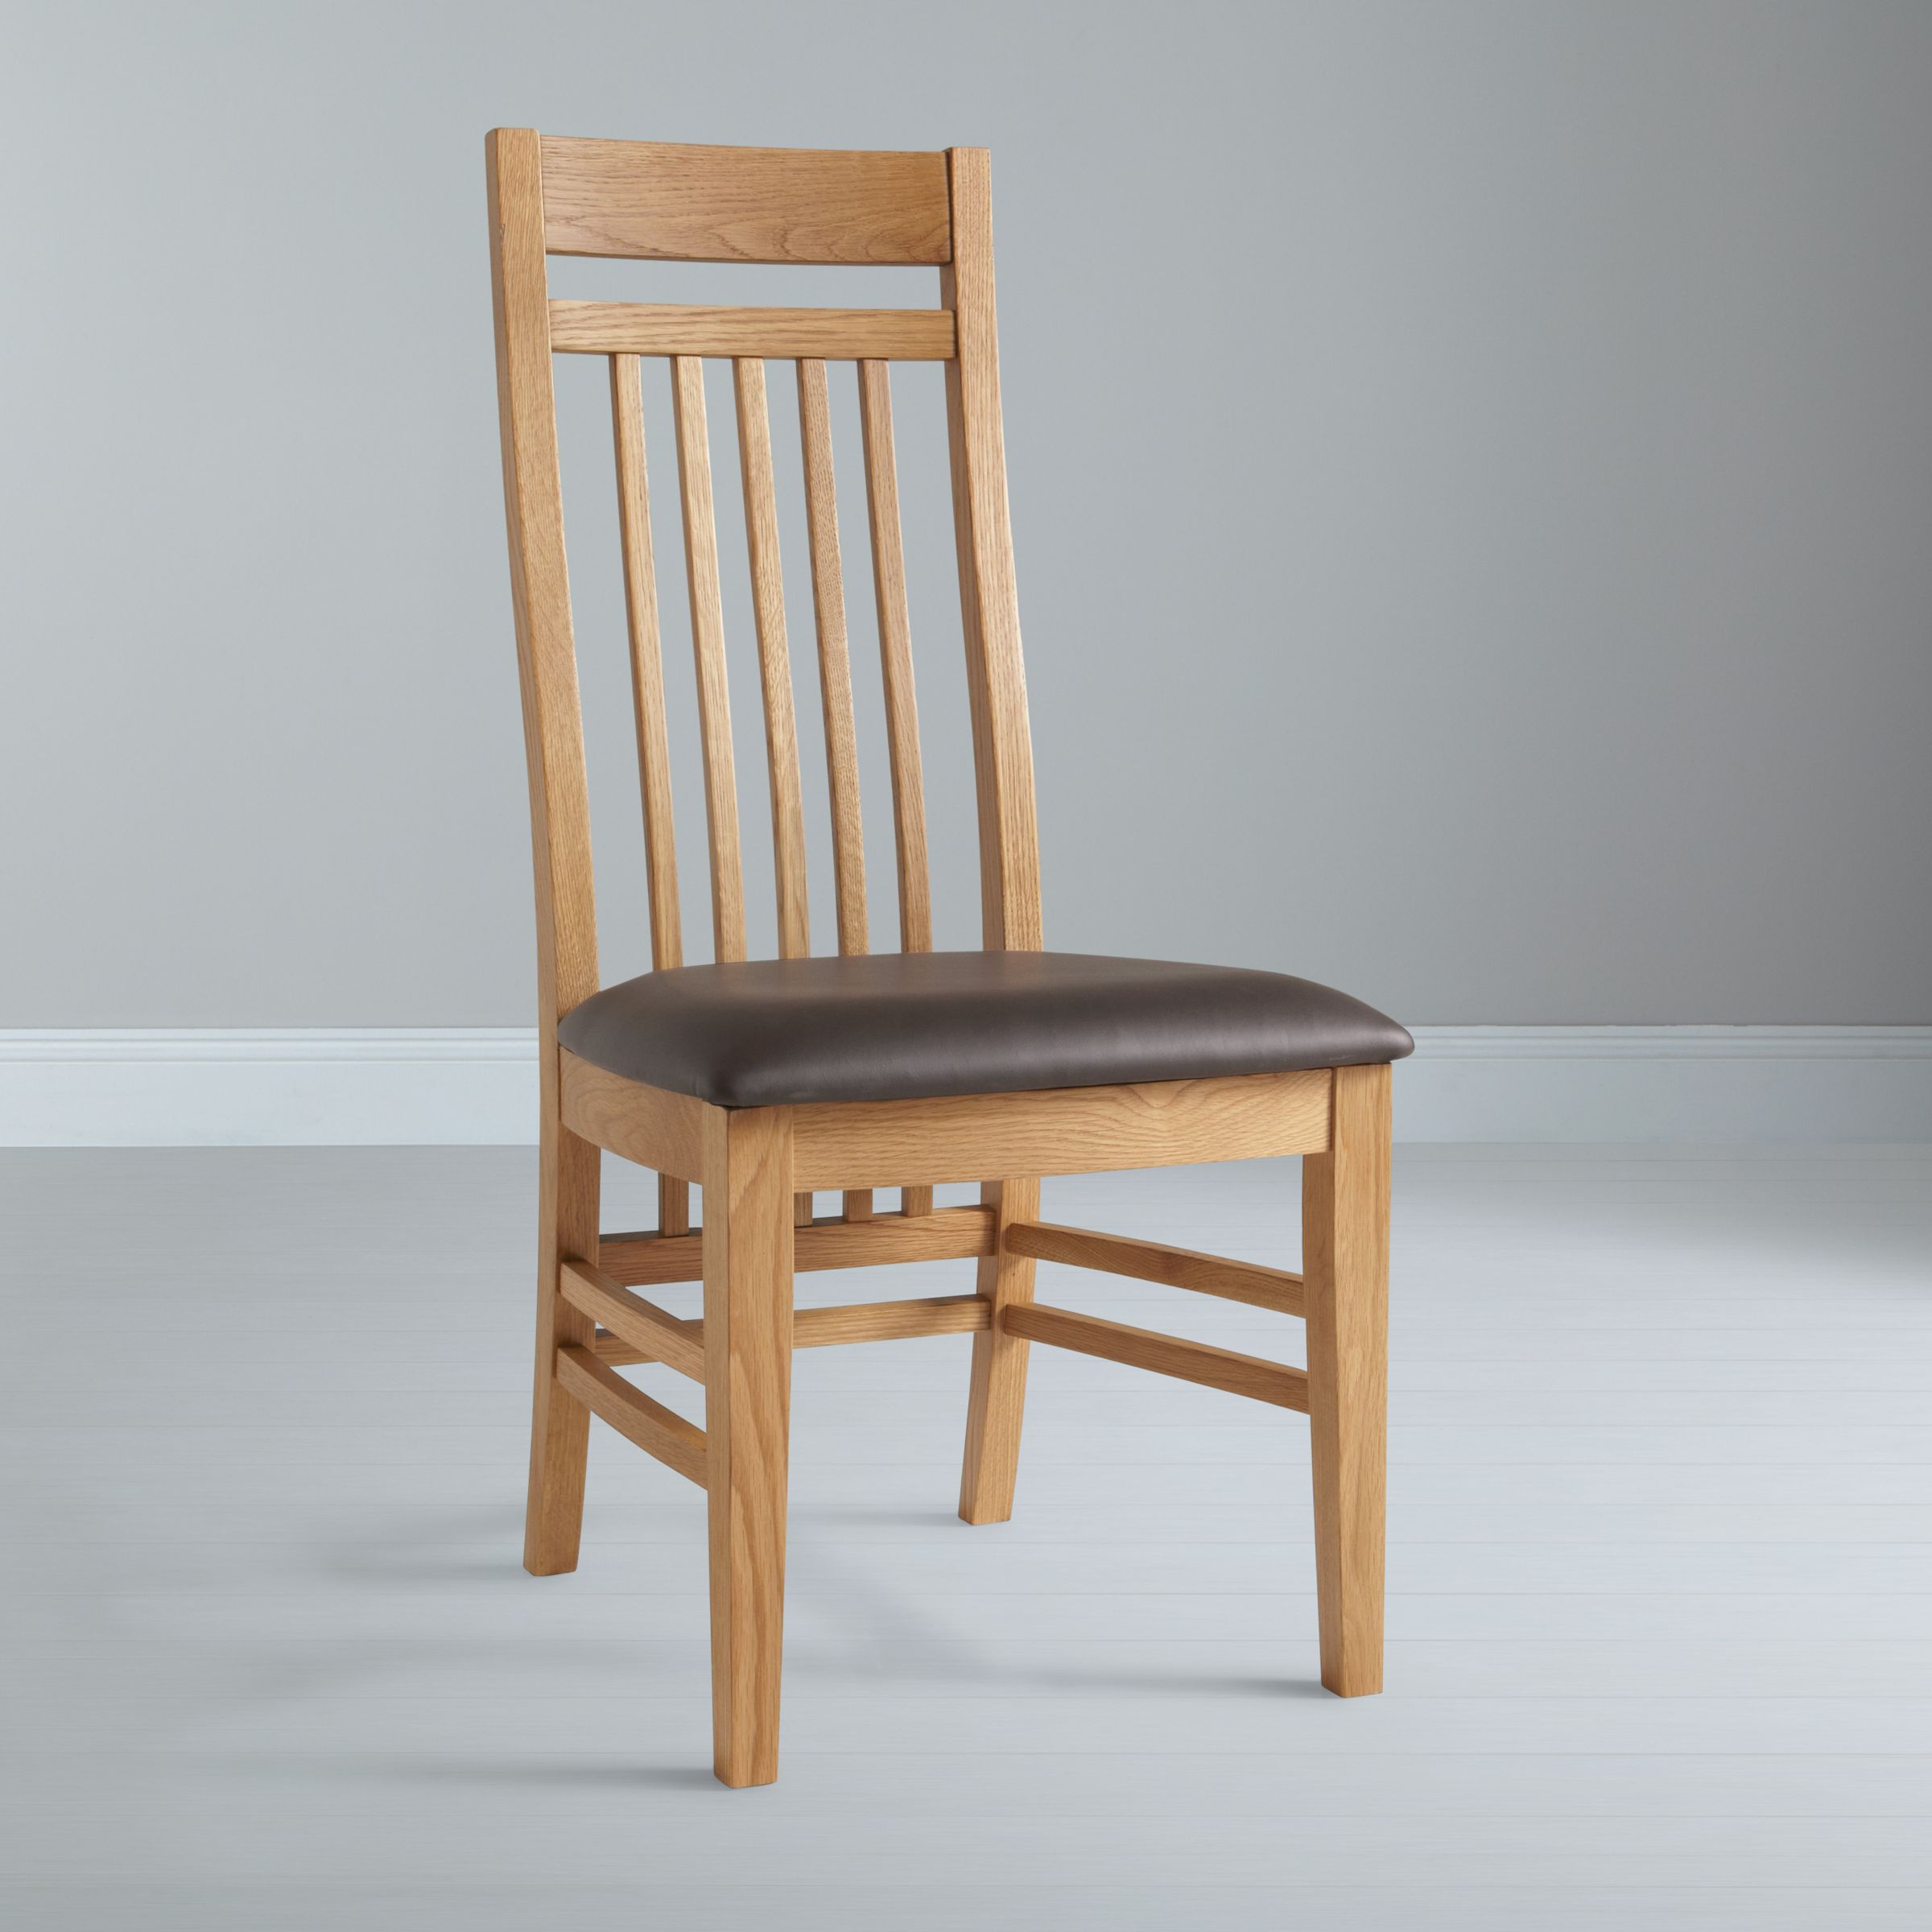 Burford Slatted Dining Chair